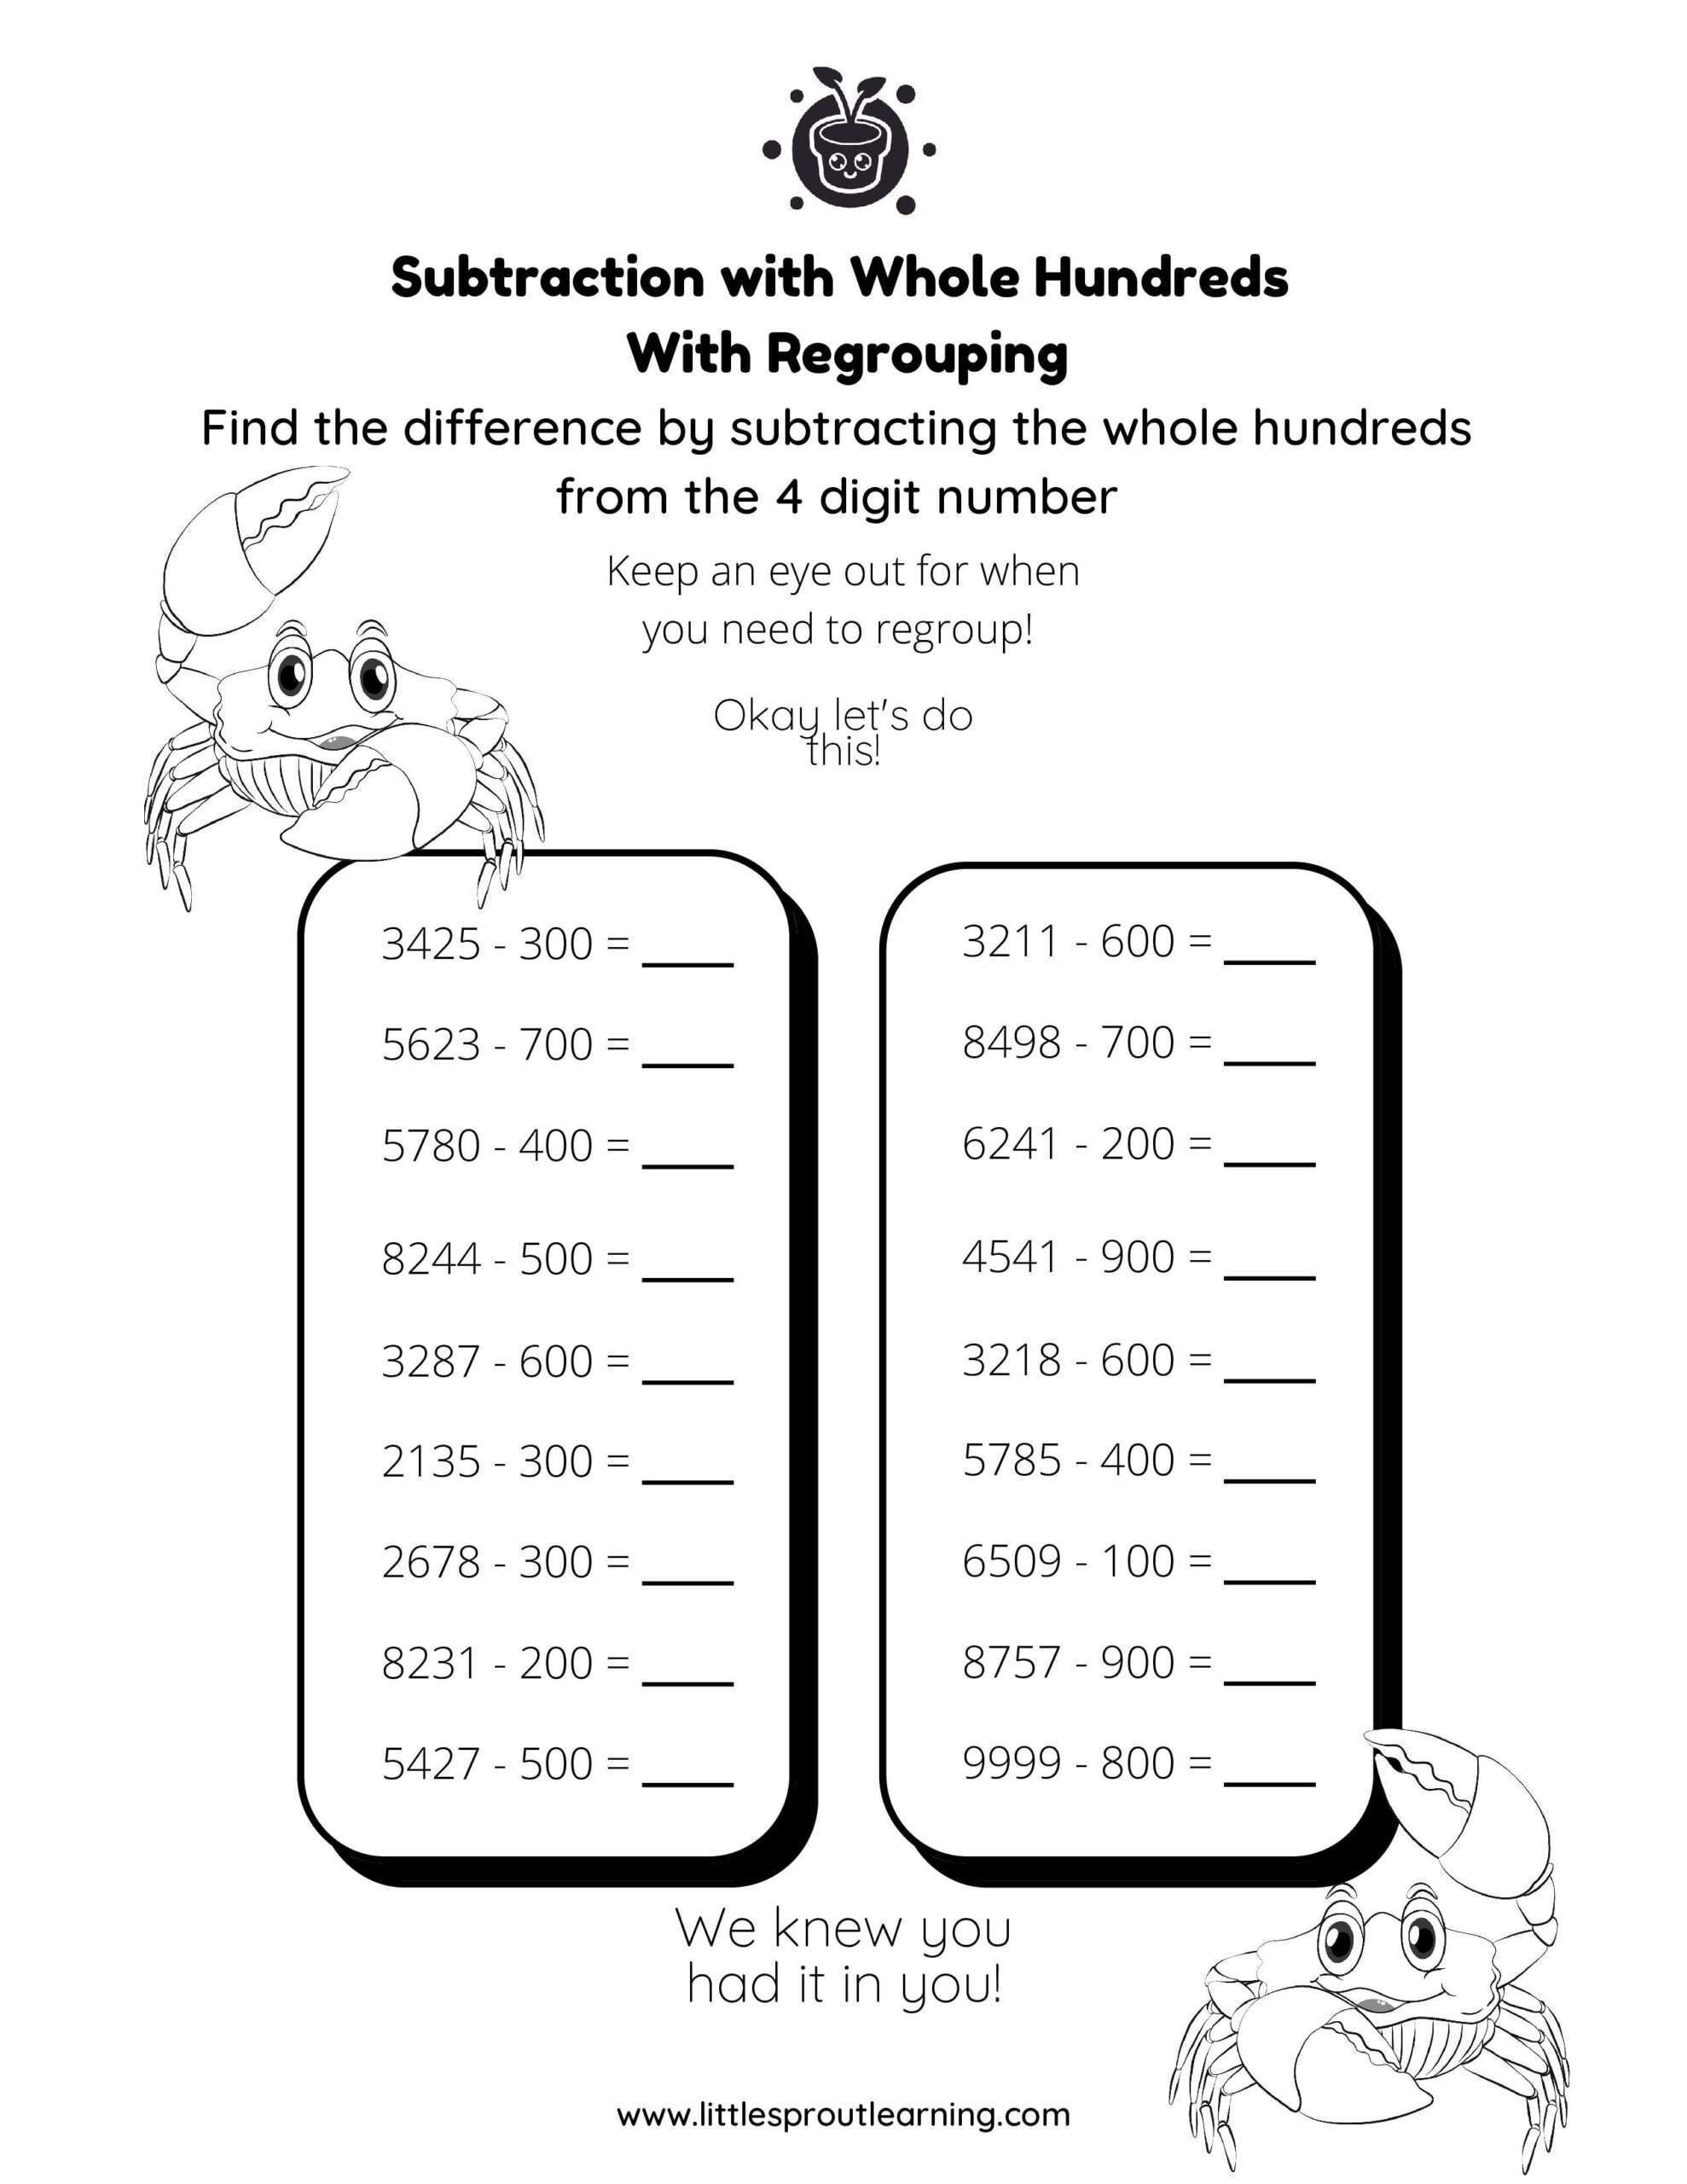 Subtraction With Whole hundreds from 4 Digit Numbers (With Regrouping)